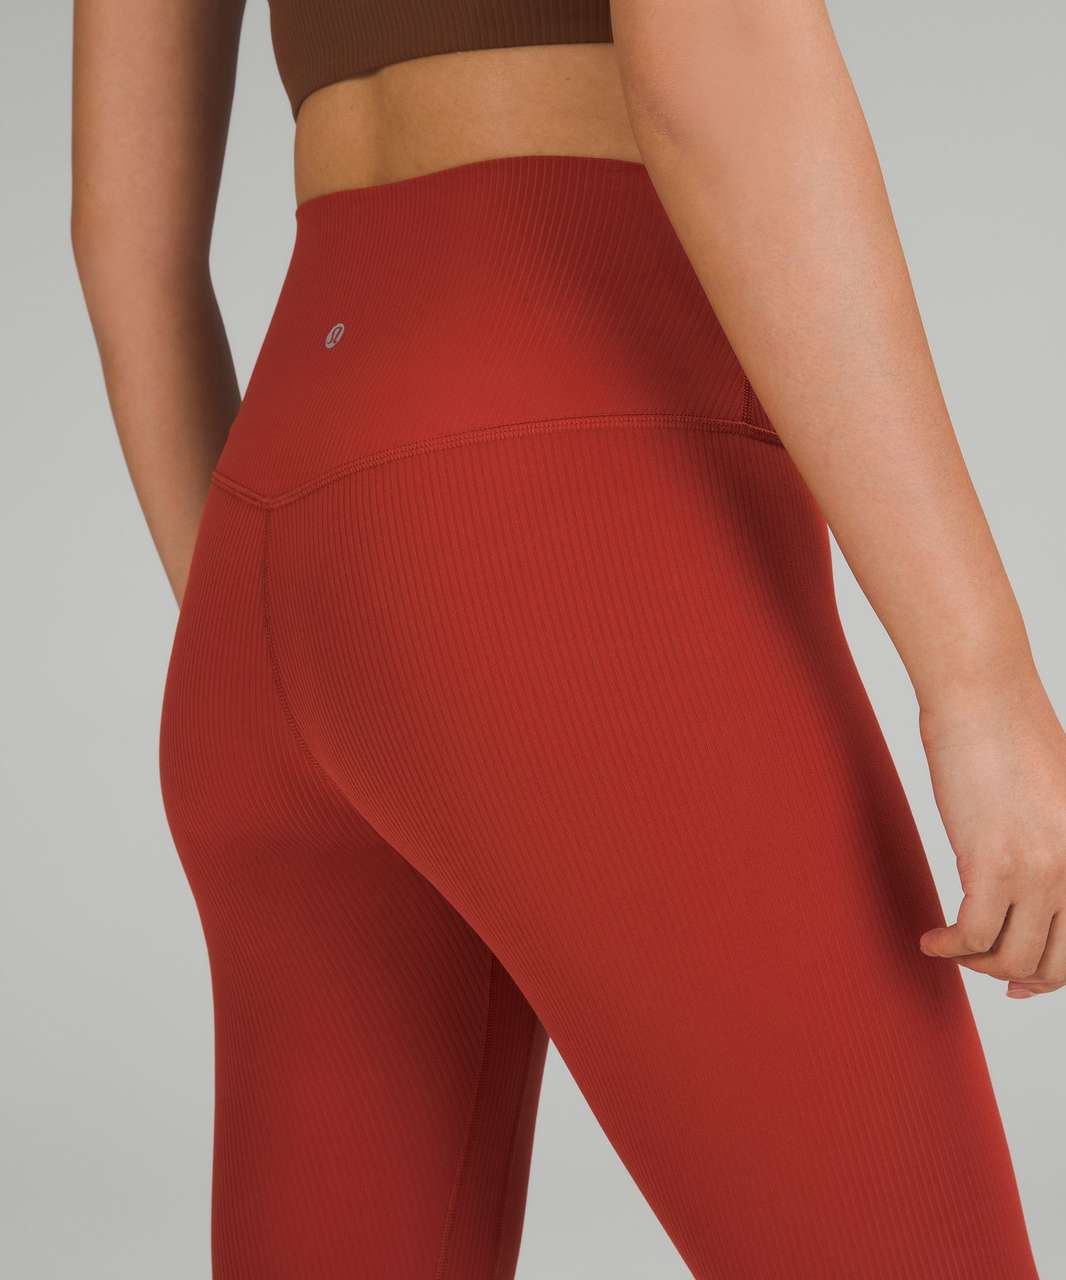 Lululemon Align High-Rise Pant with Pockets 25 - Red Merlot Size